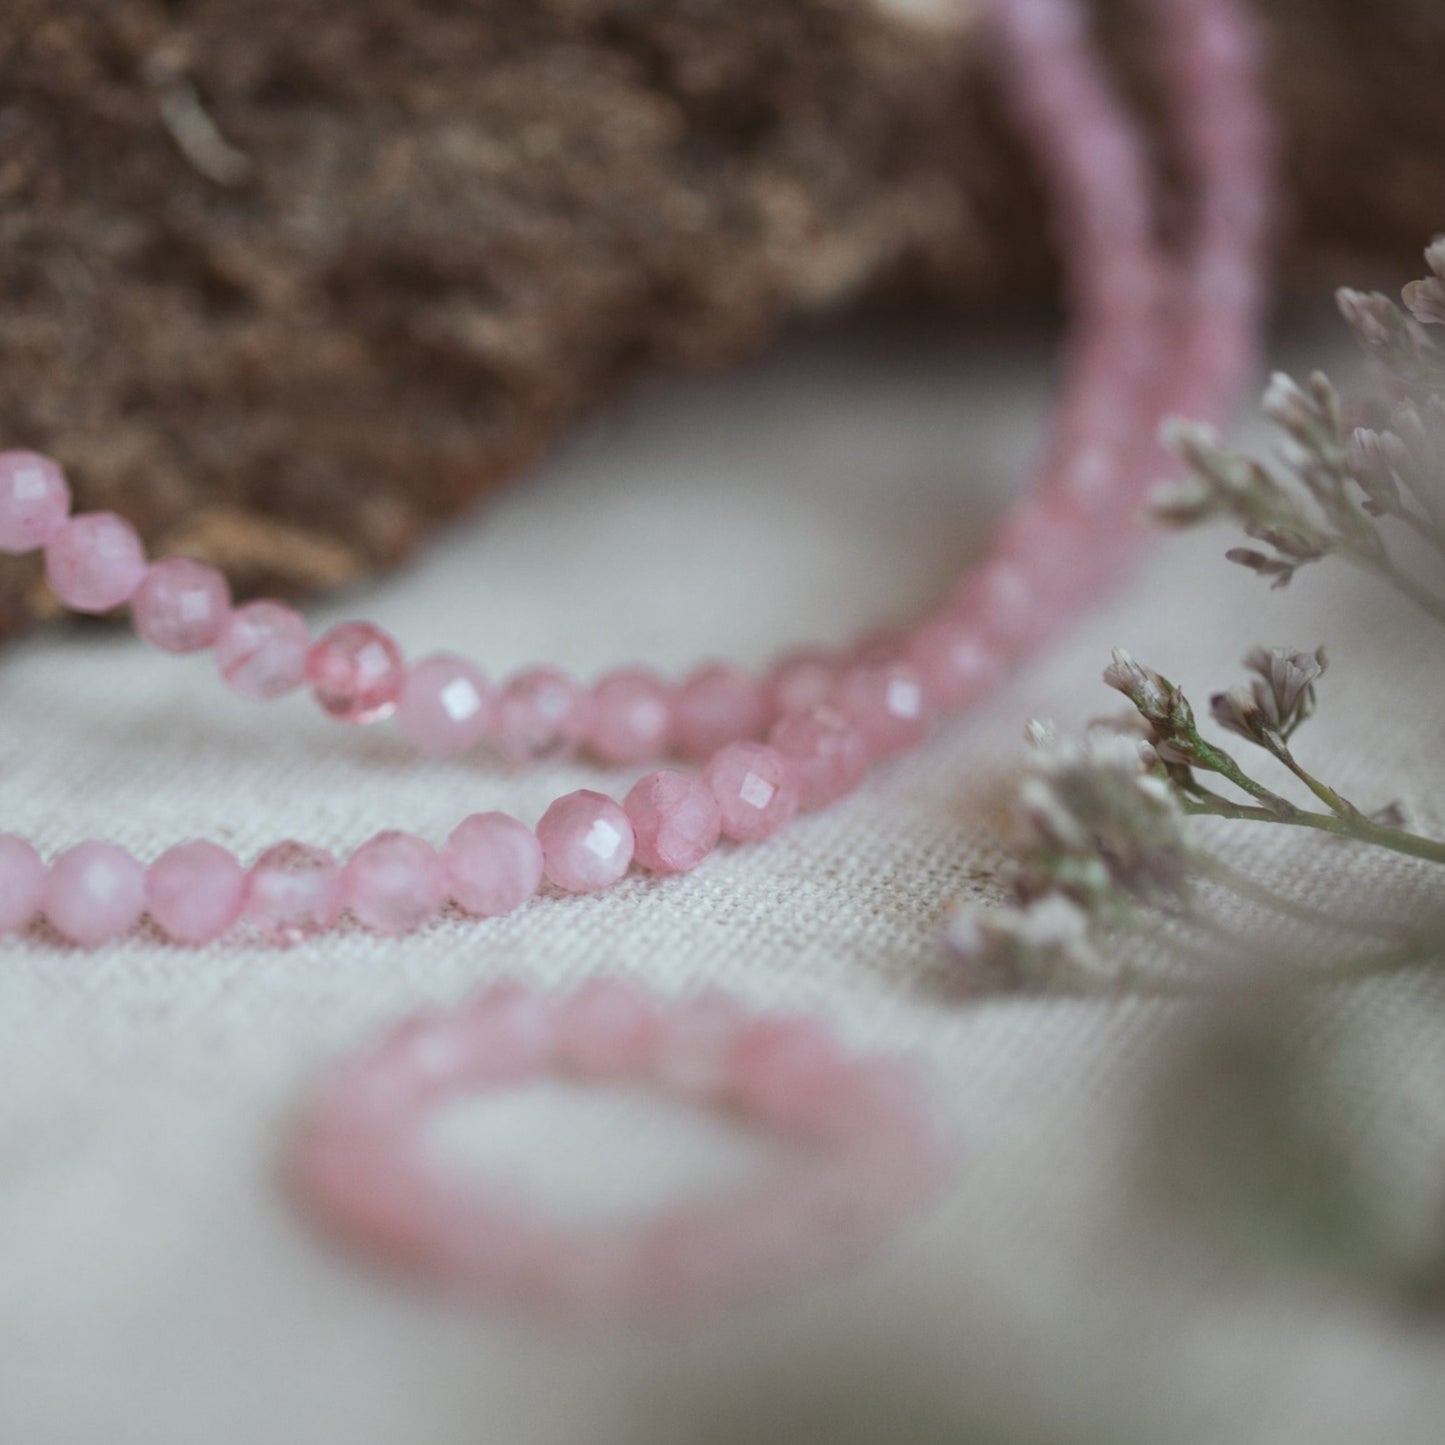 Rose Quartz Crystal Healing Beaded Ring - To embrace and love your true self